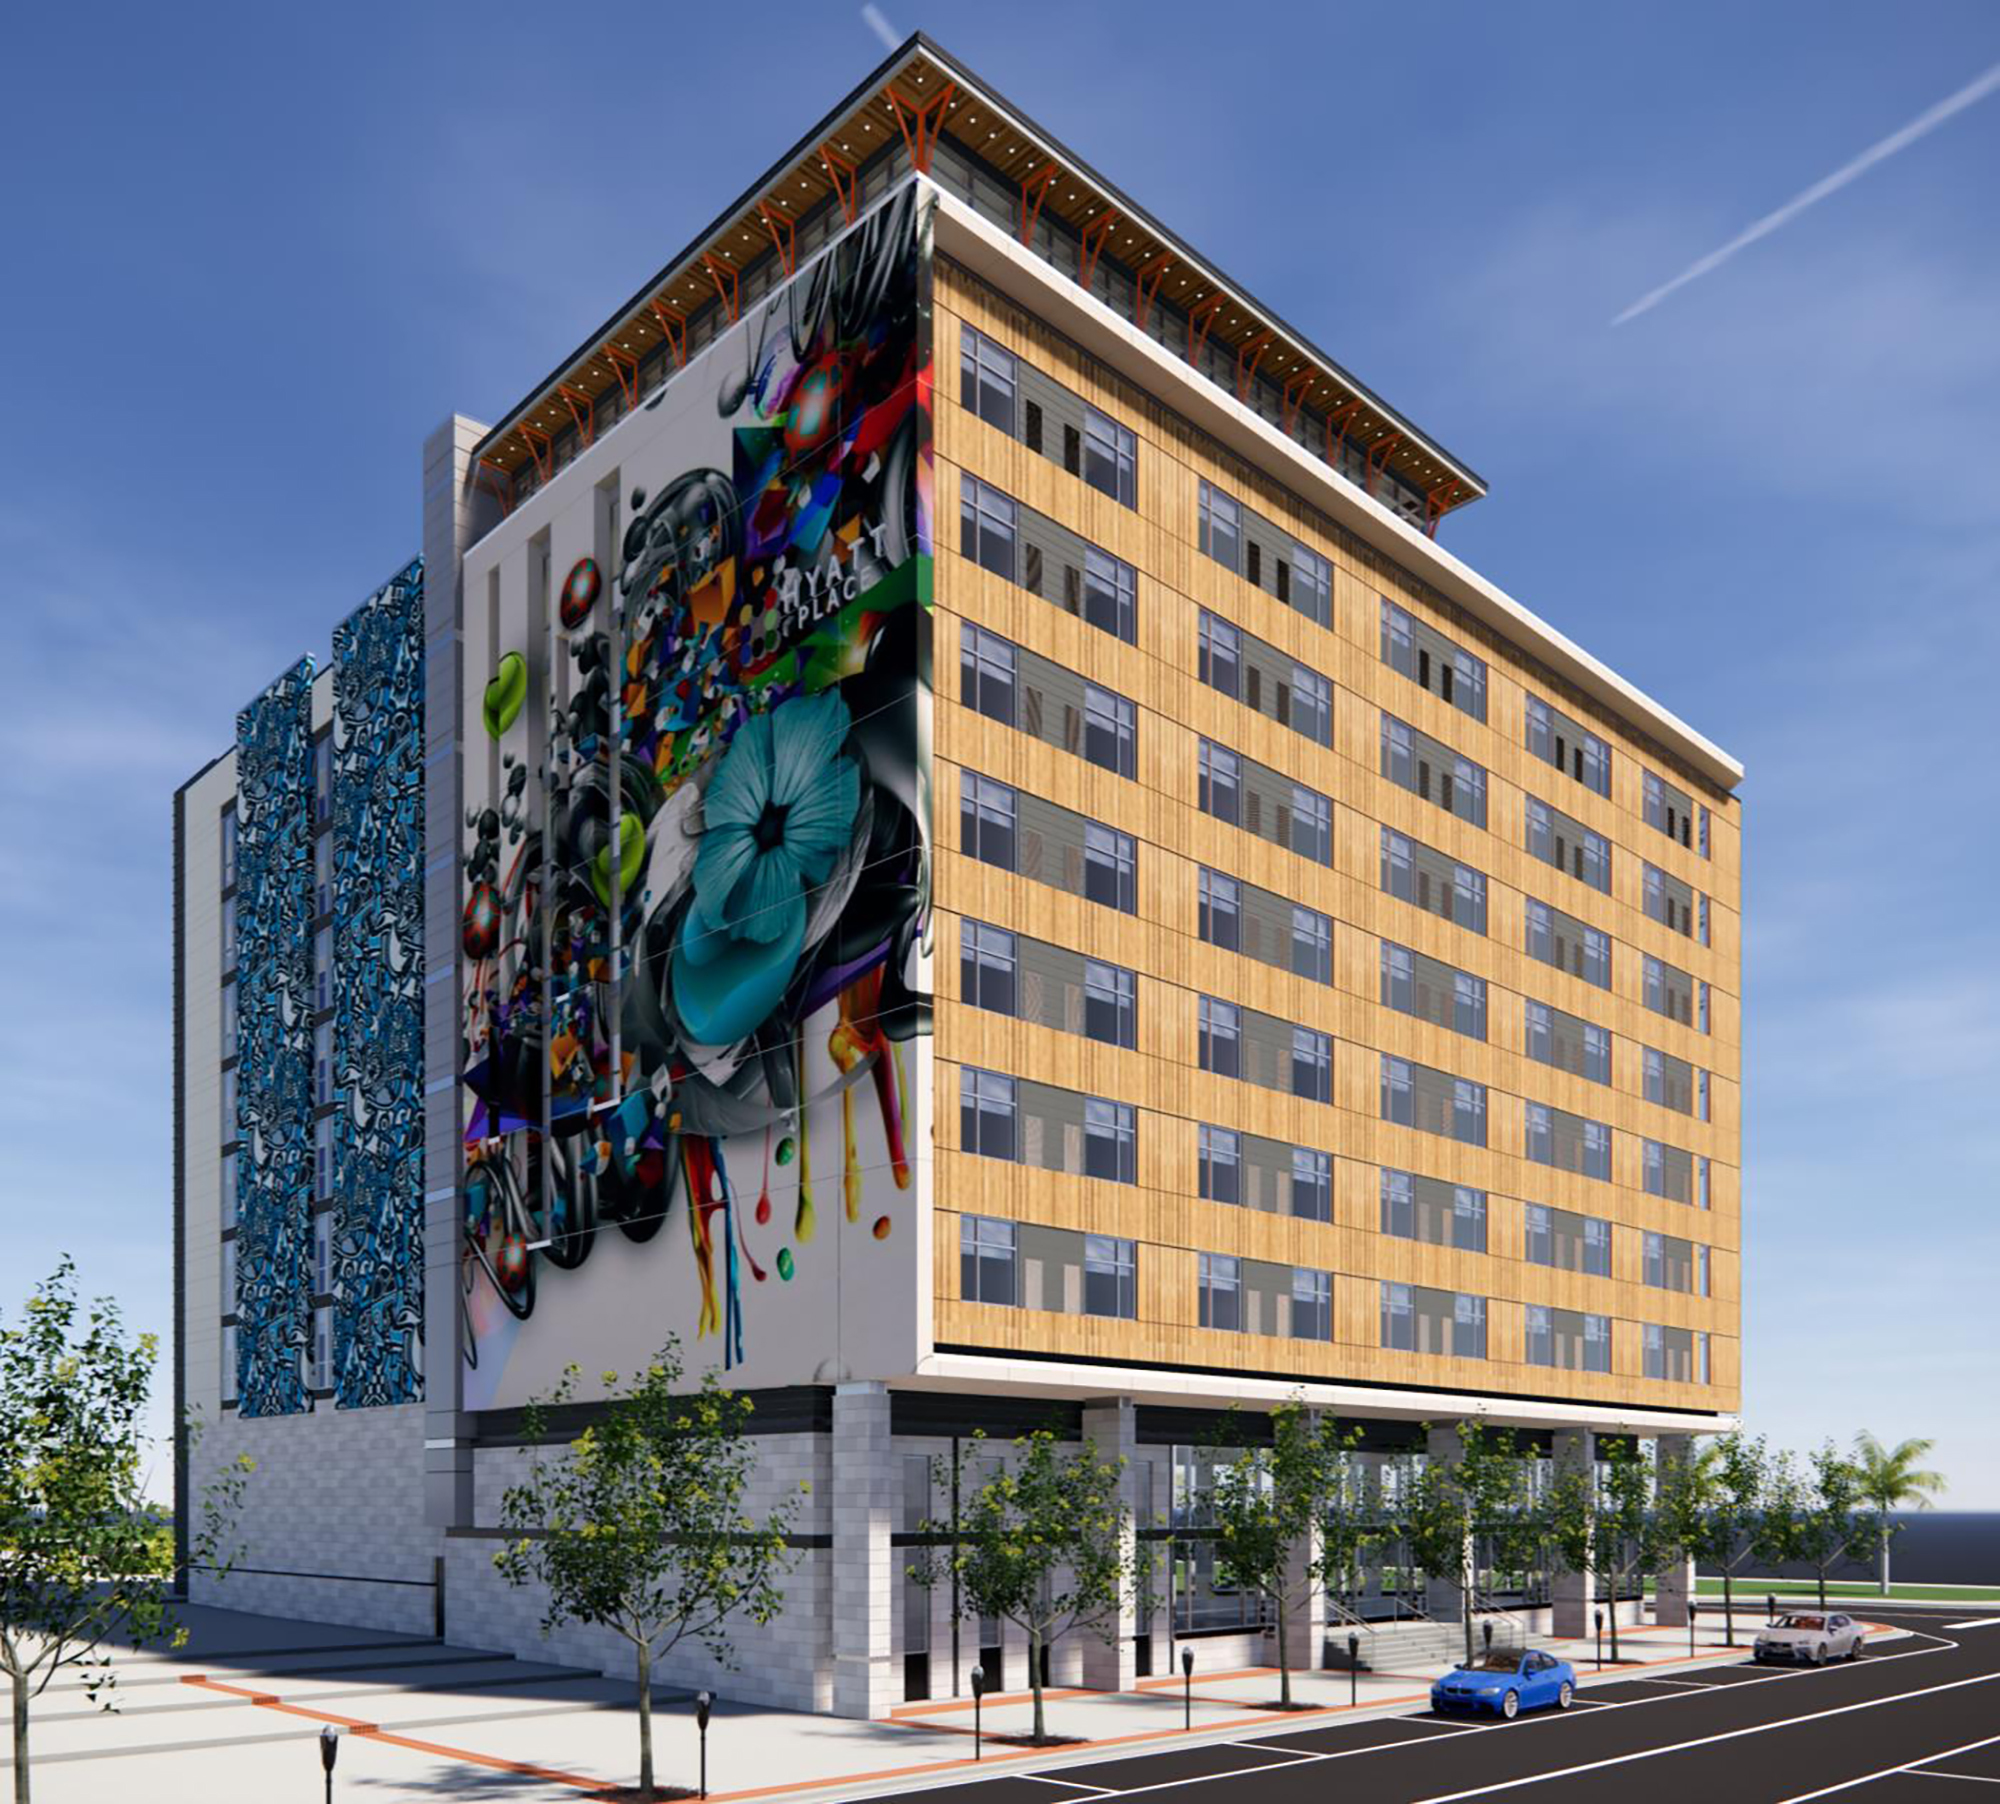 The Downtown Hyatt Place hotel plans to extend into the Hogan Street right-of-way by 5 to 6 feet .